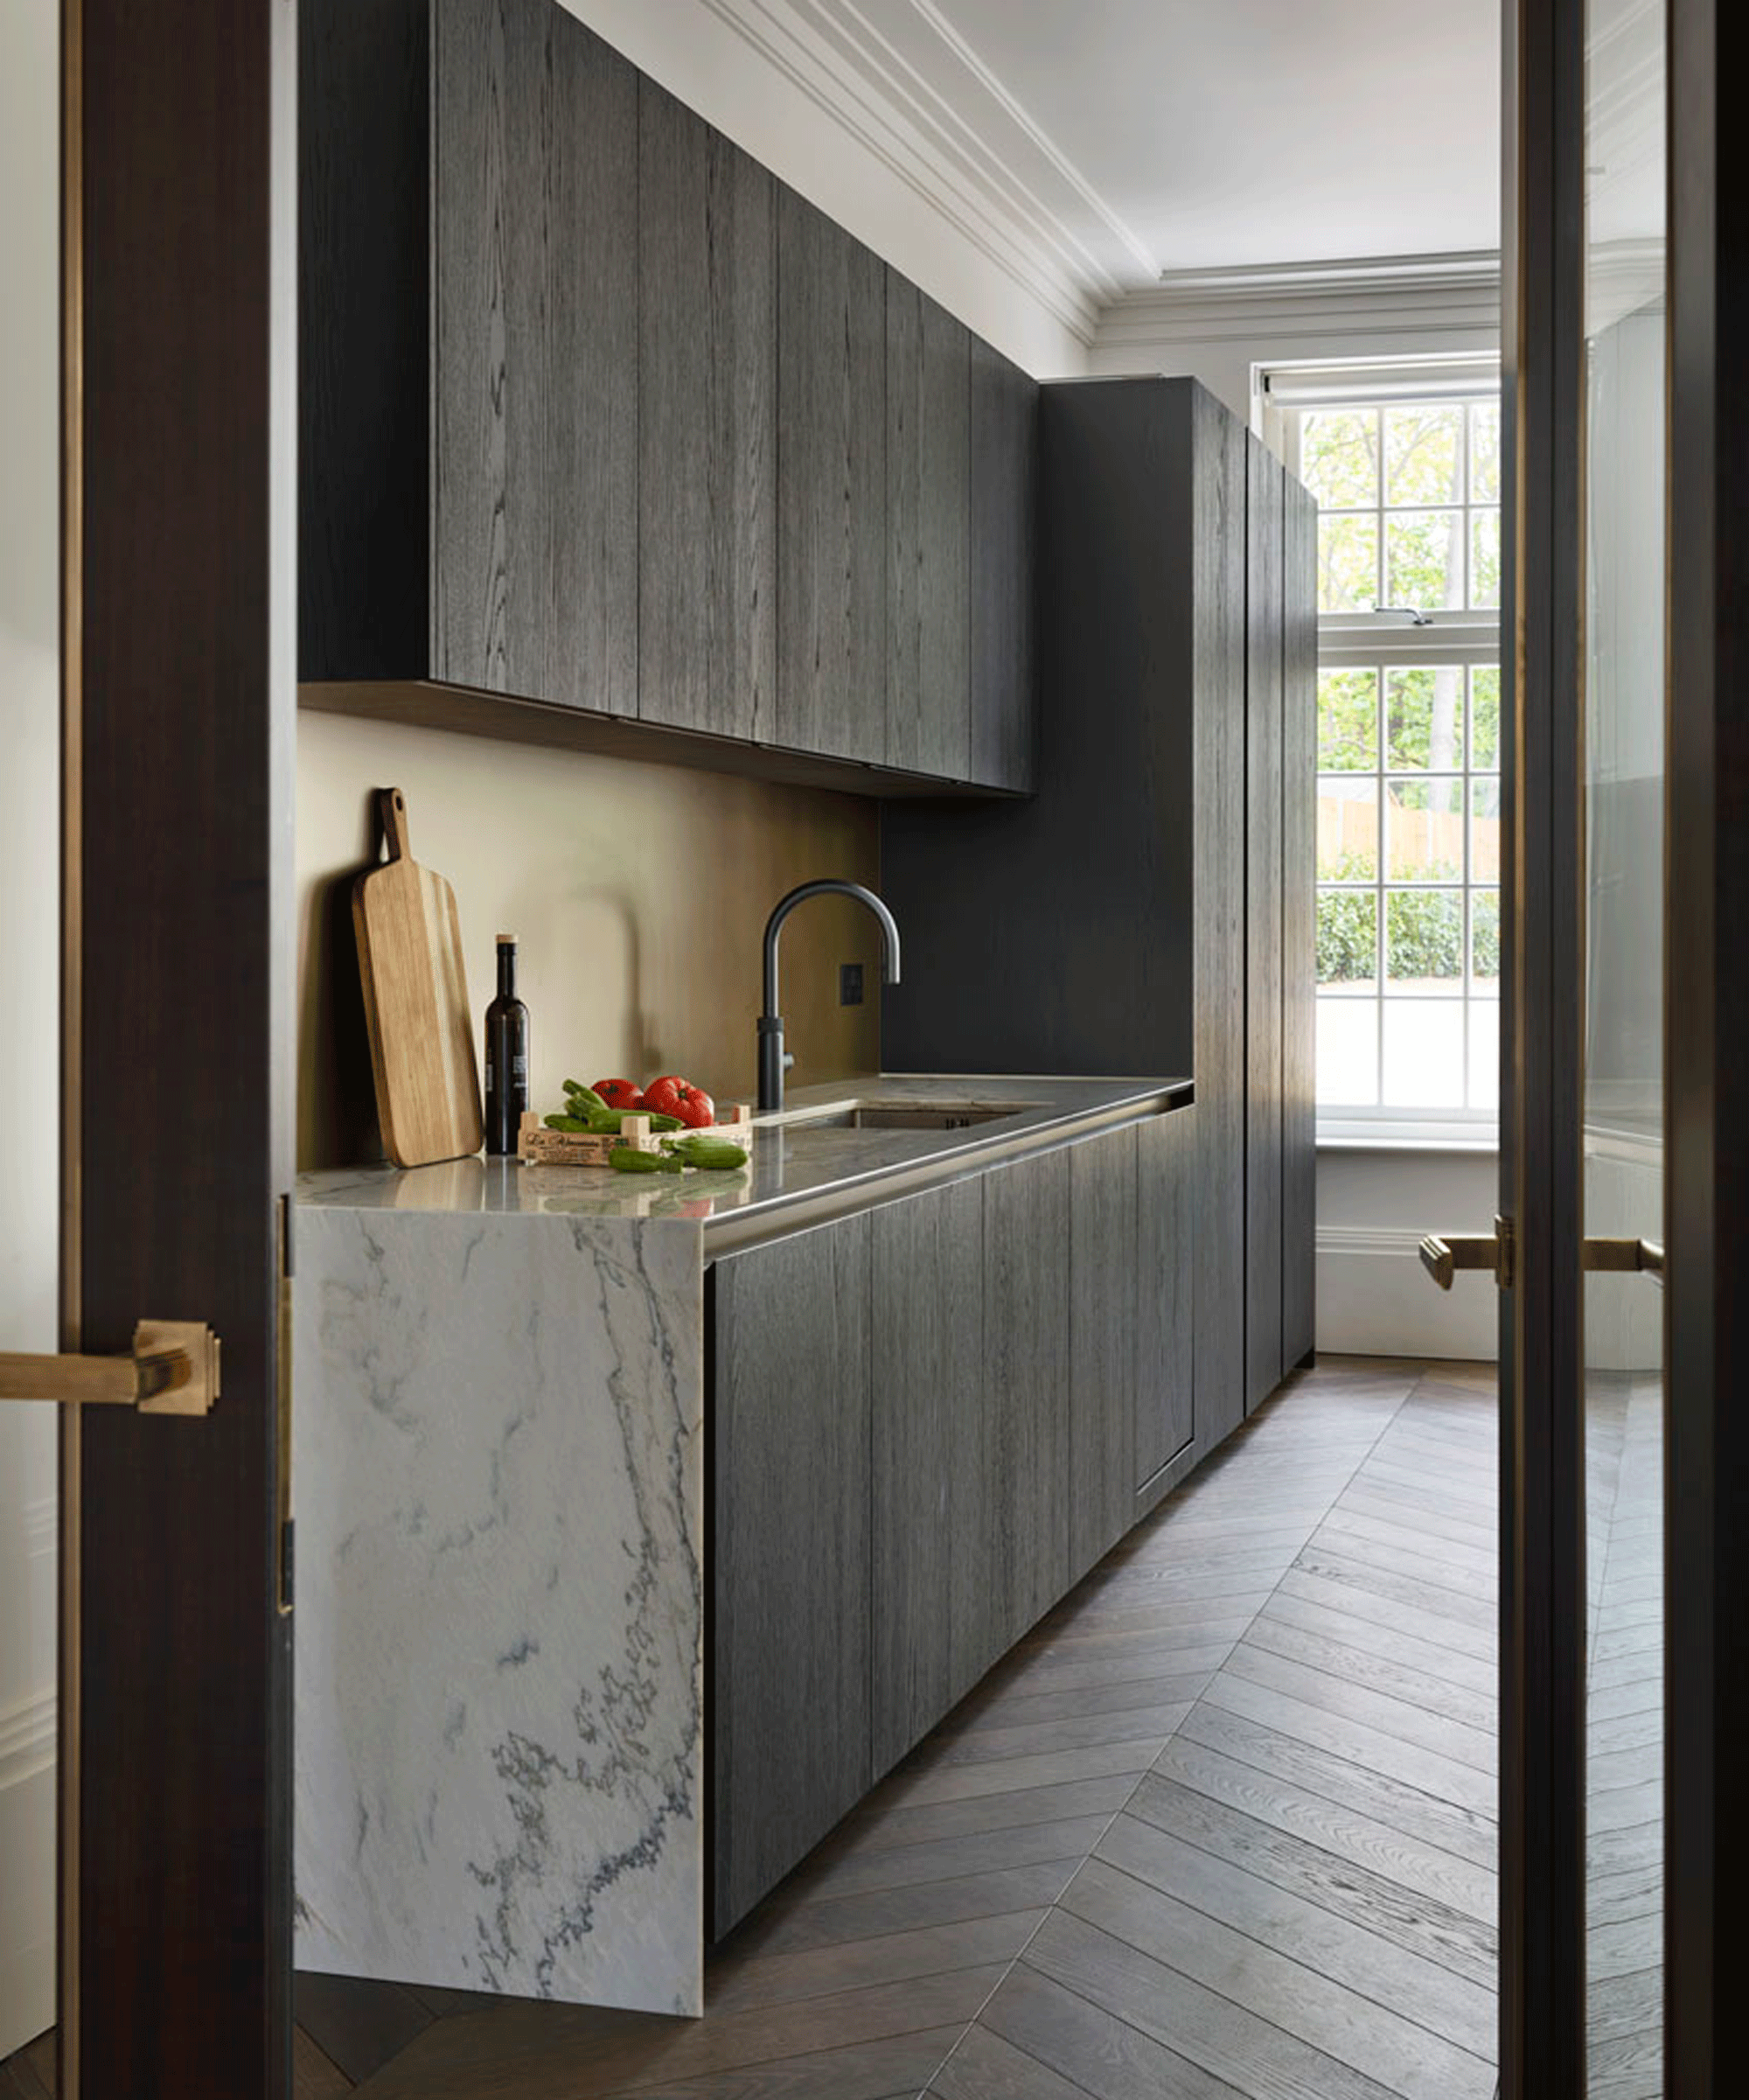 Kitchen with dark cabinetry and marble worktop falling into a waterfall design